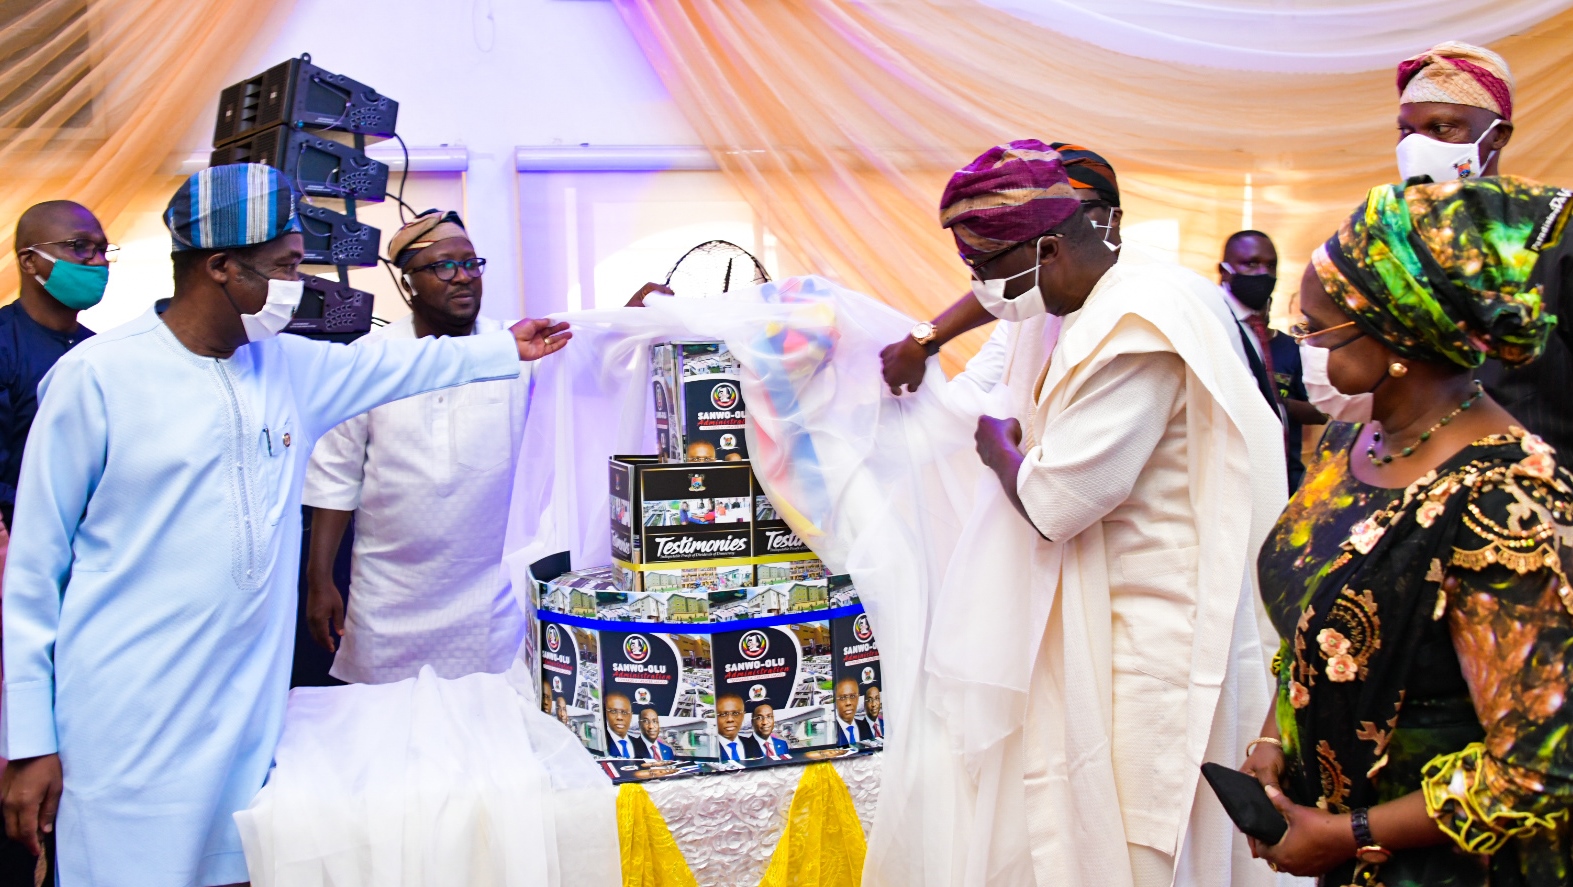 L-R: Lagos State Deputy Governor, Dr. Obafemi Hamzat; Chief Press Secretary to the Governor, Mr. Gboyega Akosile; Governor Babajide Sanwo-Olu; Secretary to the State Government, Mrs. Folasade Jaji and Chief of Staff to the Governor, Mr. Tayo Ayinde during the public presentation of two books  -Towards a Greater Lagos and Testimonies: Indisputable Proofs of Dividends of Democracy, as part of activities to commemorate the First Year in Office of the Sanwo-Olu’s administration, at Lagos House, Marina, on Friday, May 29, 2020.